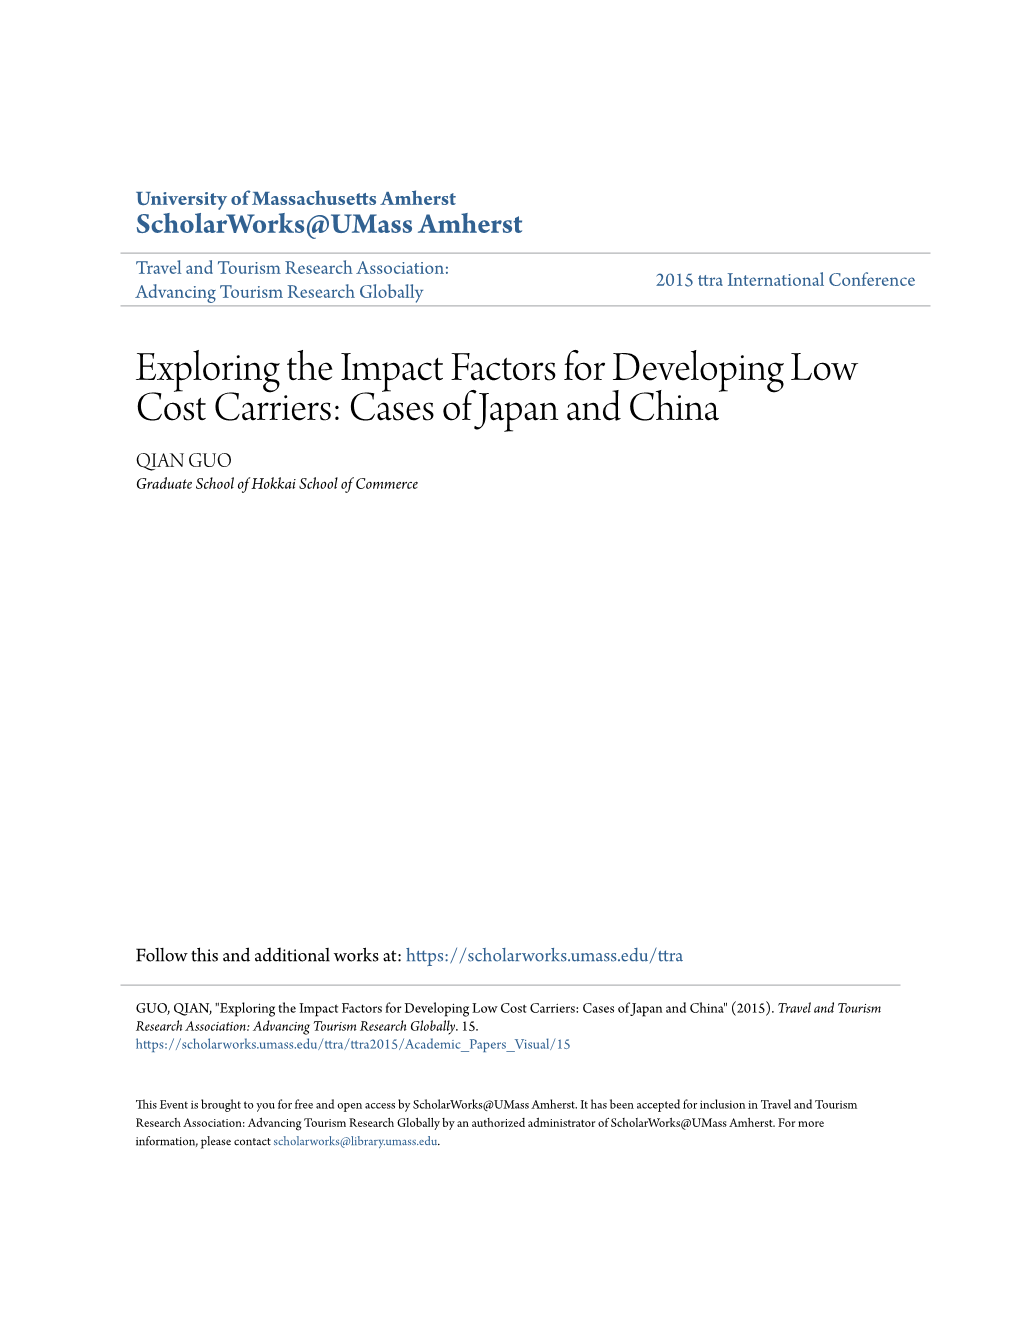 Exploring the Impact Factors for Developing Low Cost Carriers: Cases of Japan and China QIAN GUO Graduate School of Hokkai School of Commerce